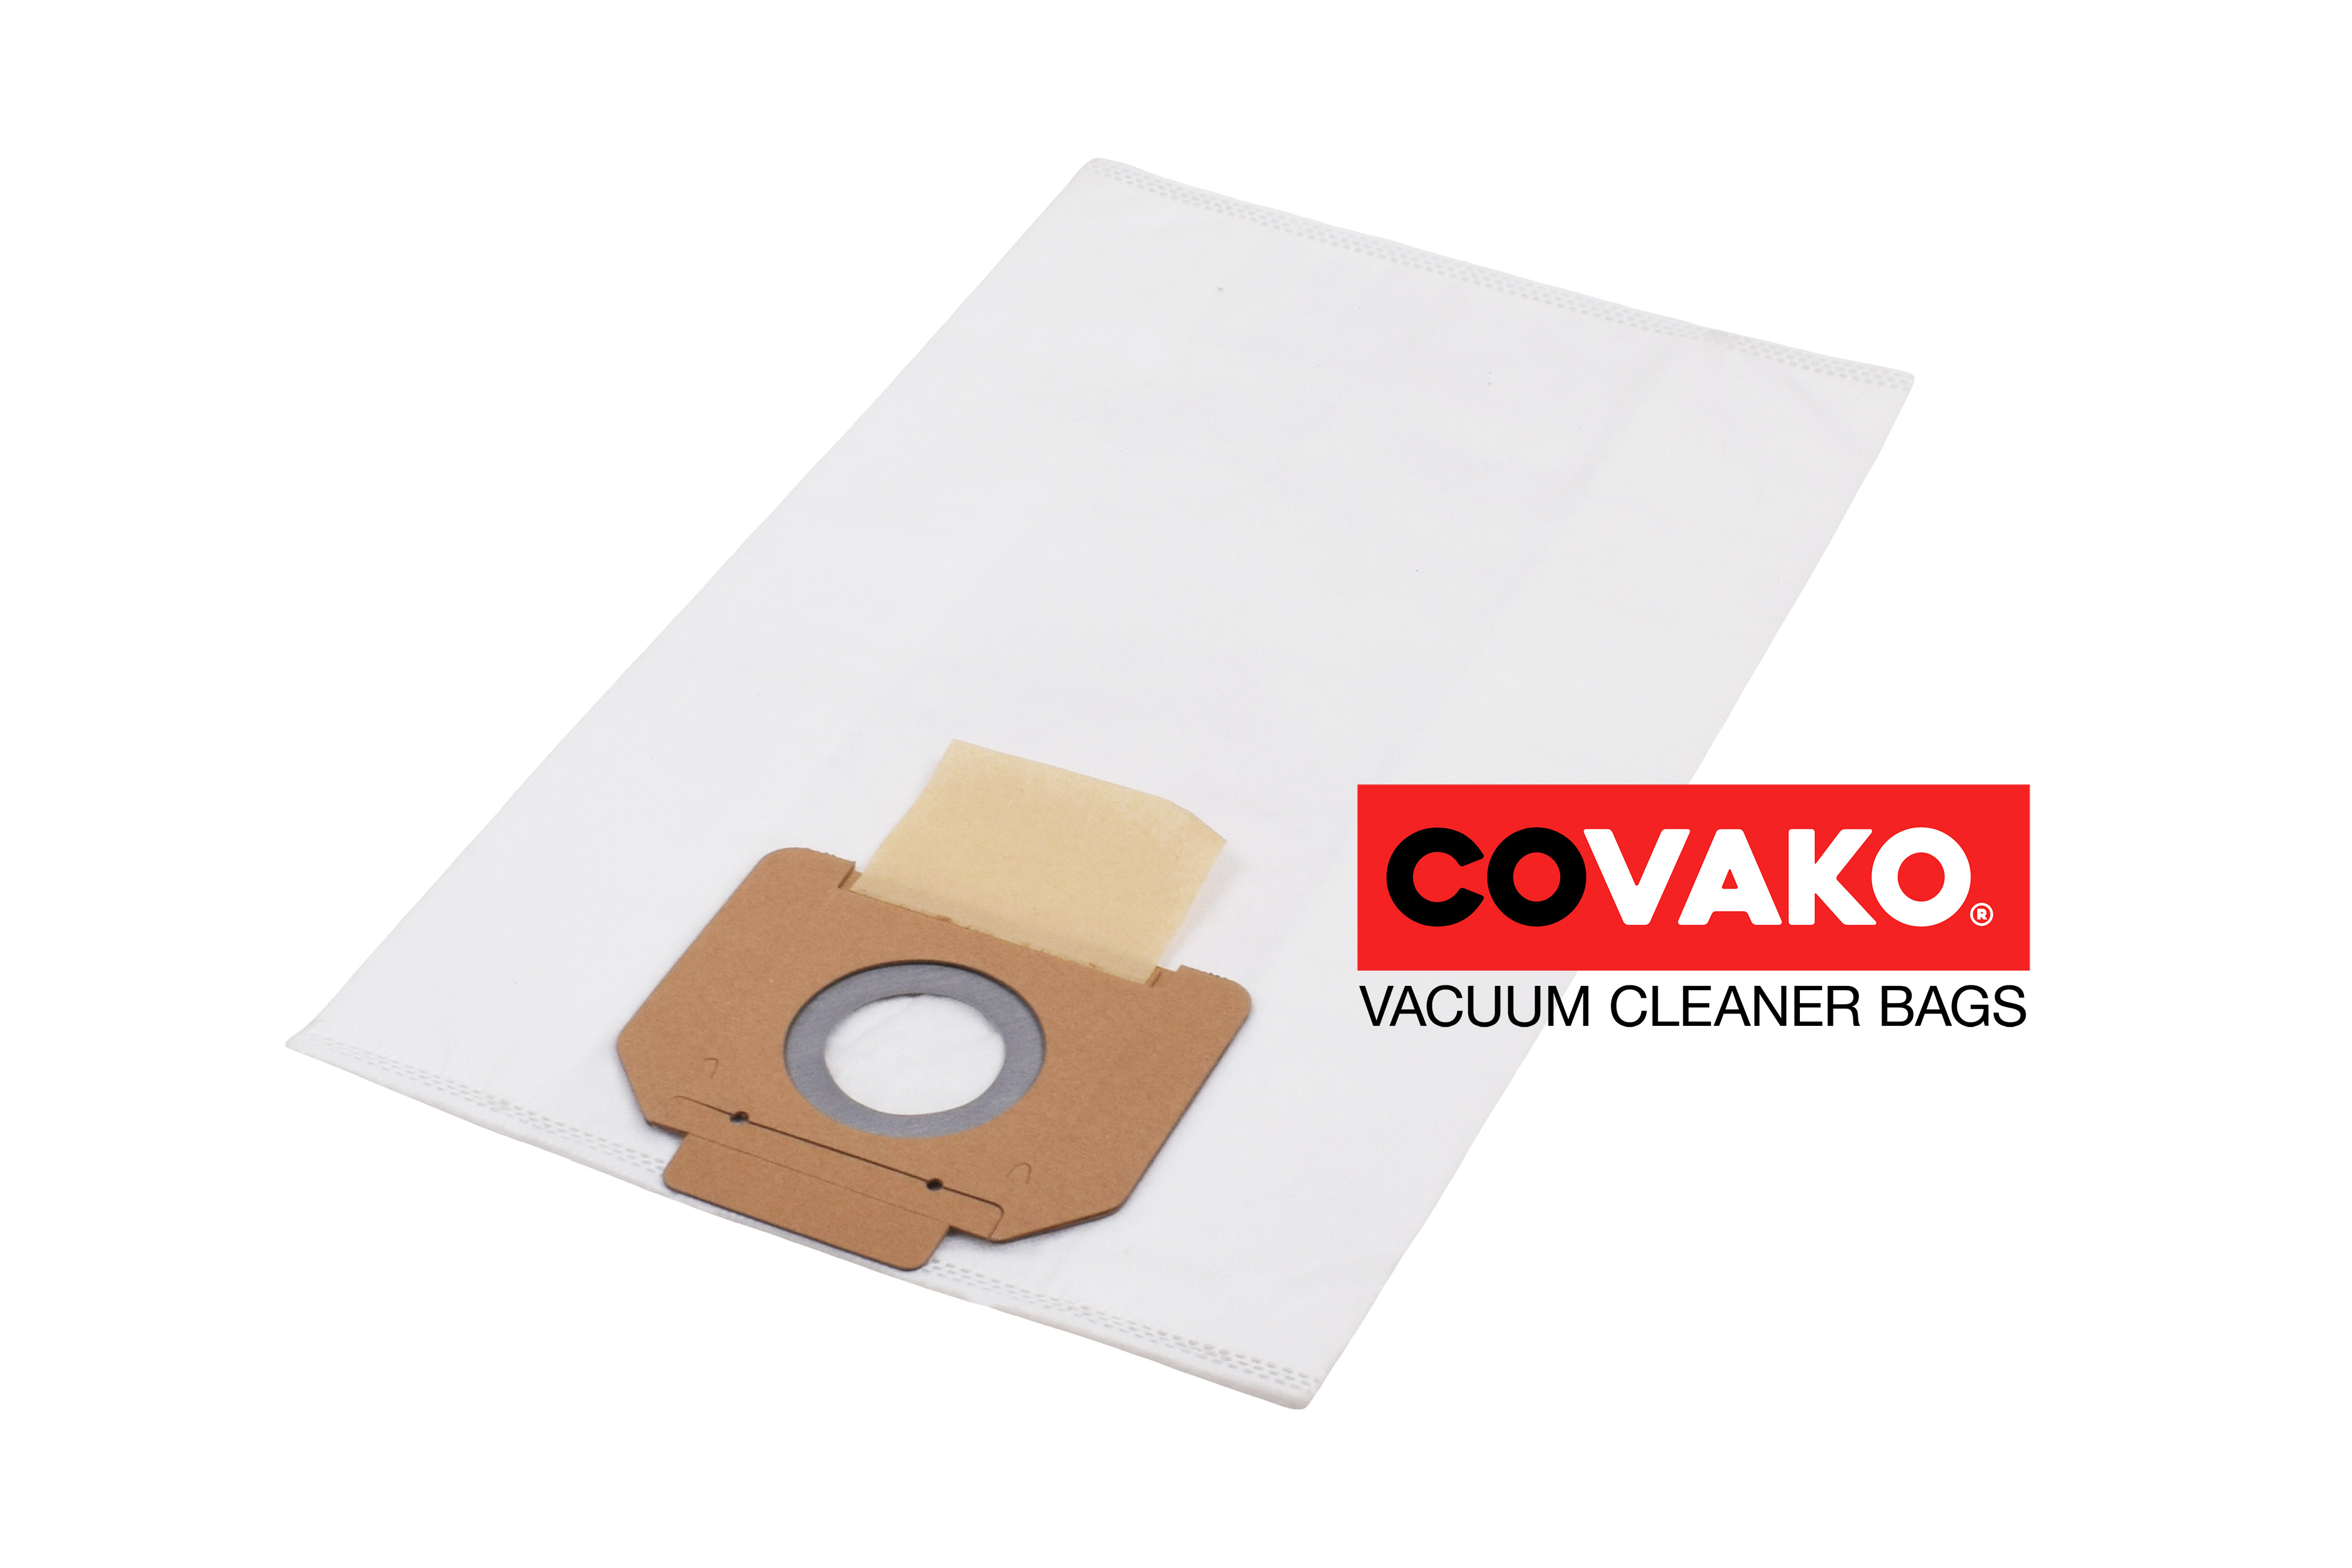 Cleancraft dryCat 137 RSCM / Synthesis - Cleancraft vacuum cleaner bags